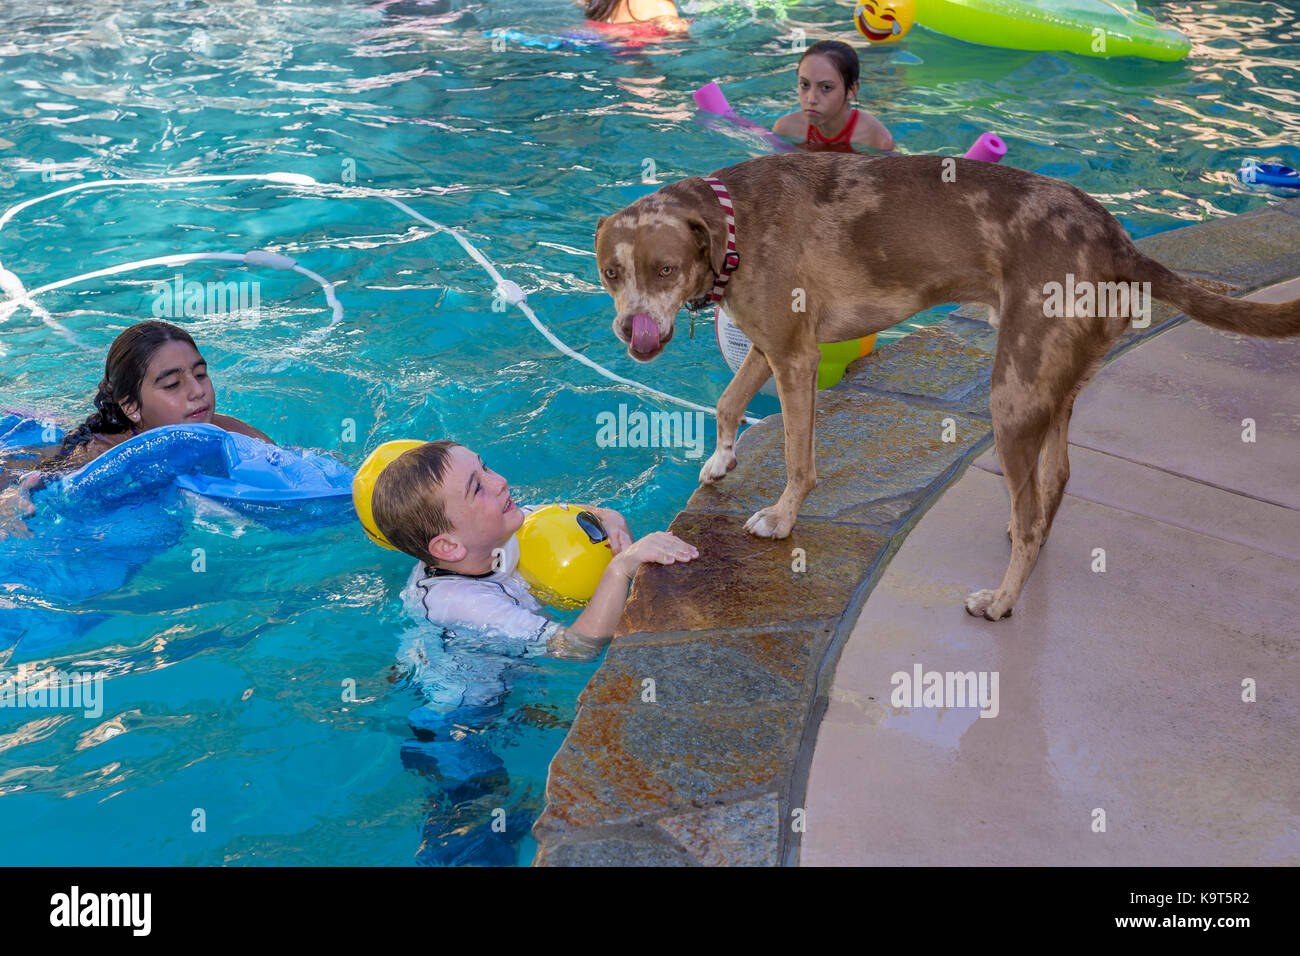 mix-breed Catahoula Leopard licking nose, boy, girls, children, playing in freshwater swimming pool, Castro Valley, California, United States Stock Photo